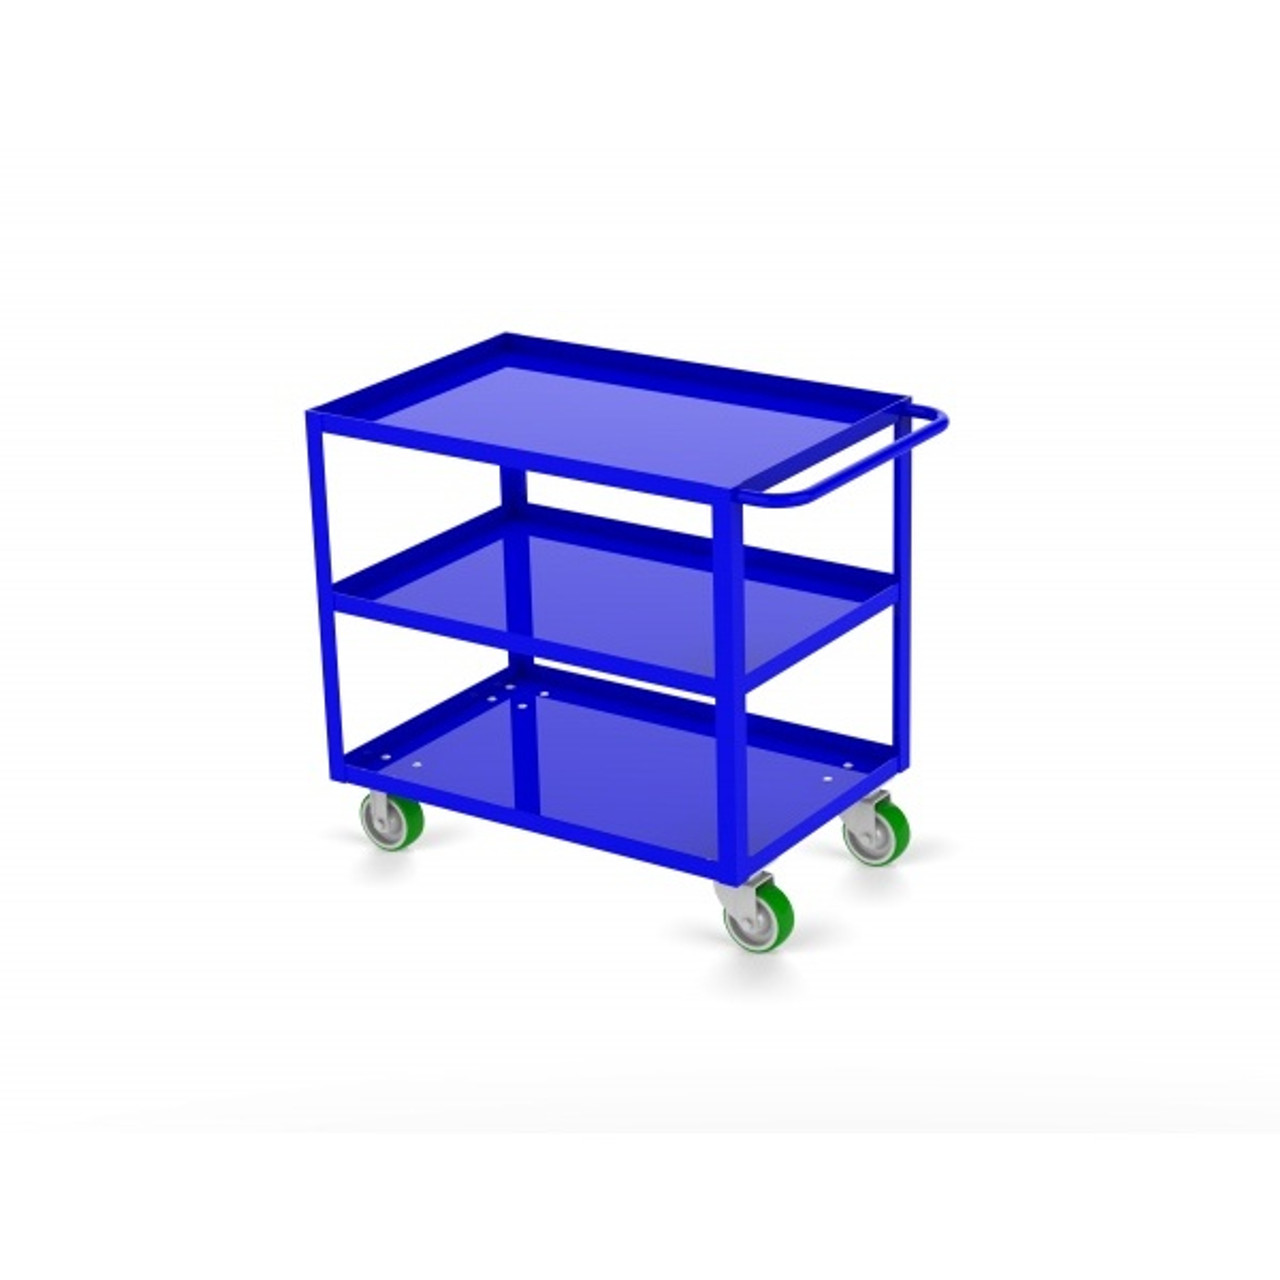 Valley Craft Three Shelf 30 x 48" Utility Cart, Blue with Poly Casters (CALL FOR BEST PRICING)